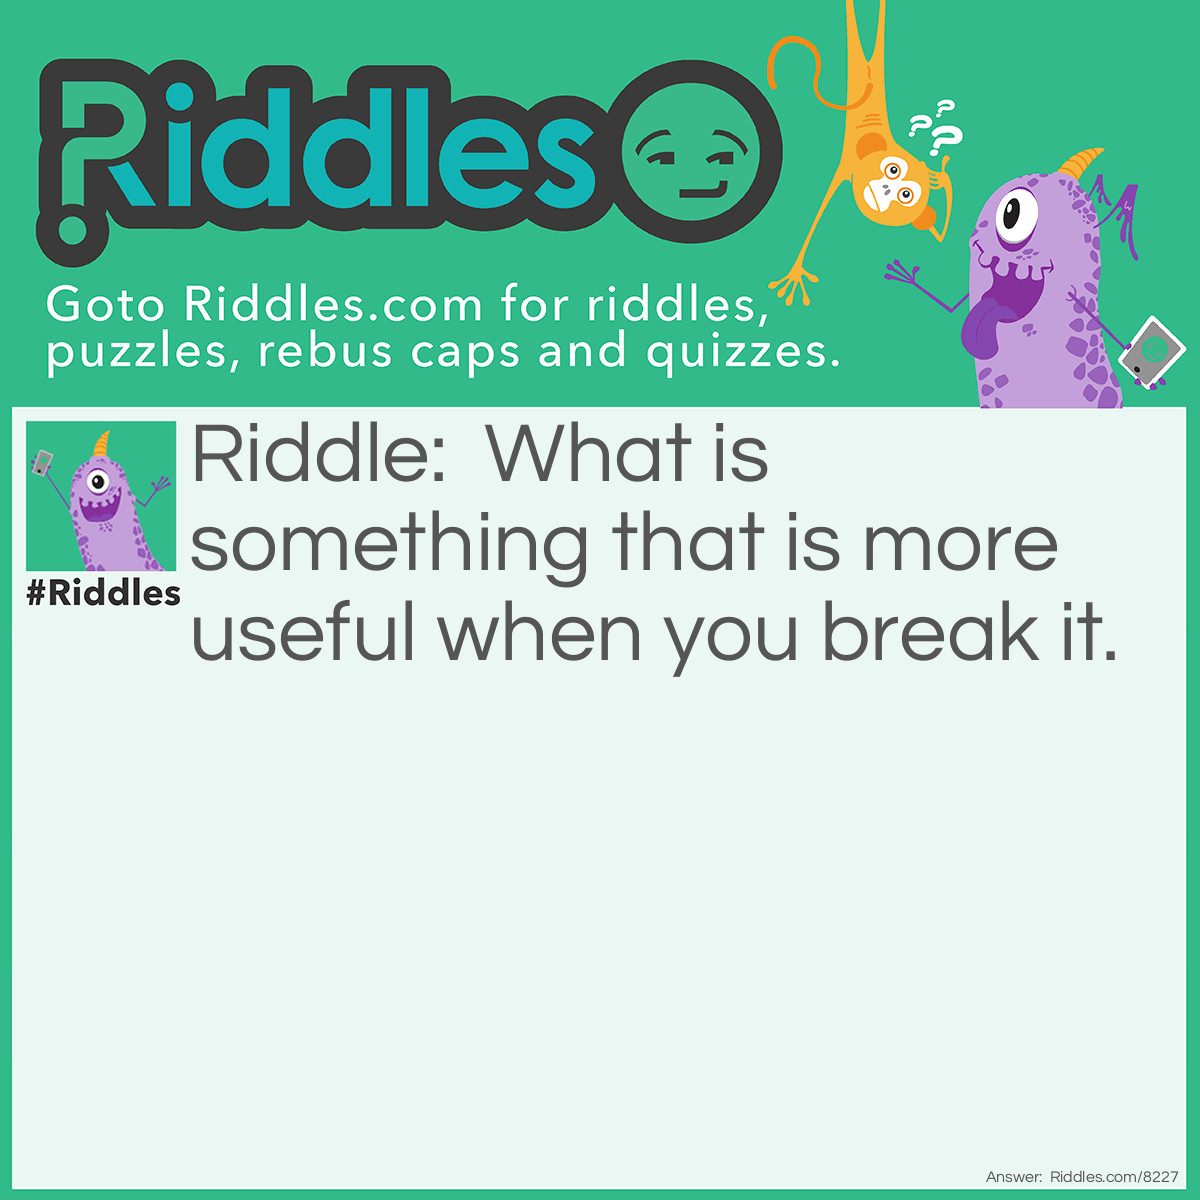 Riddle: What is something that is more useful when you break it? Answer: A glow stick.